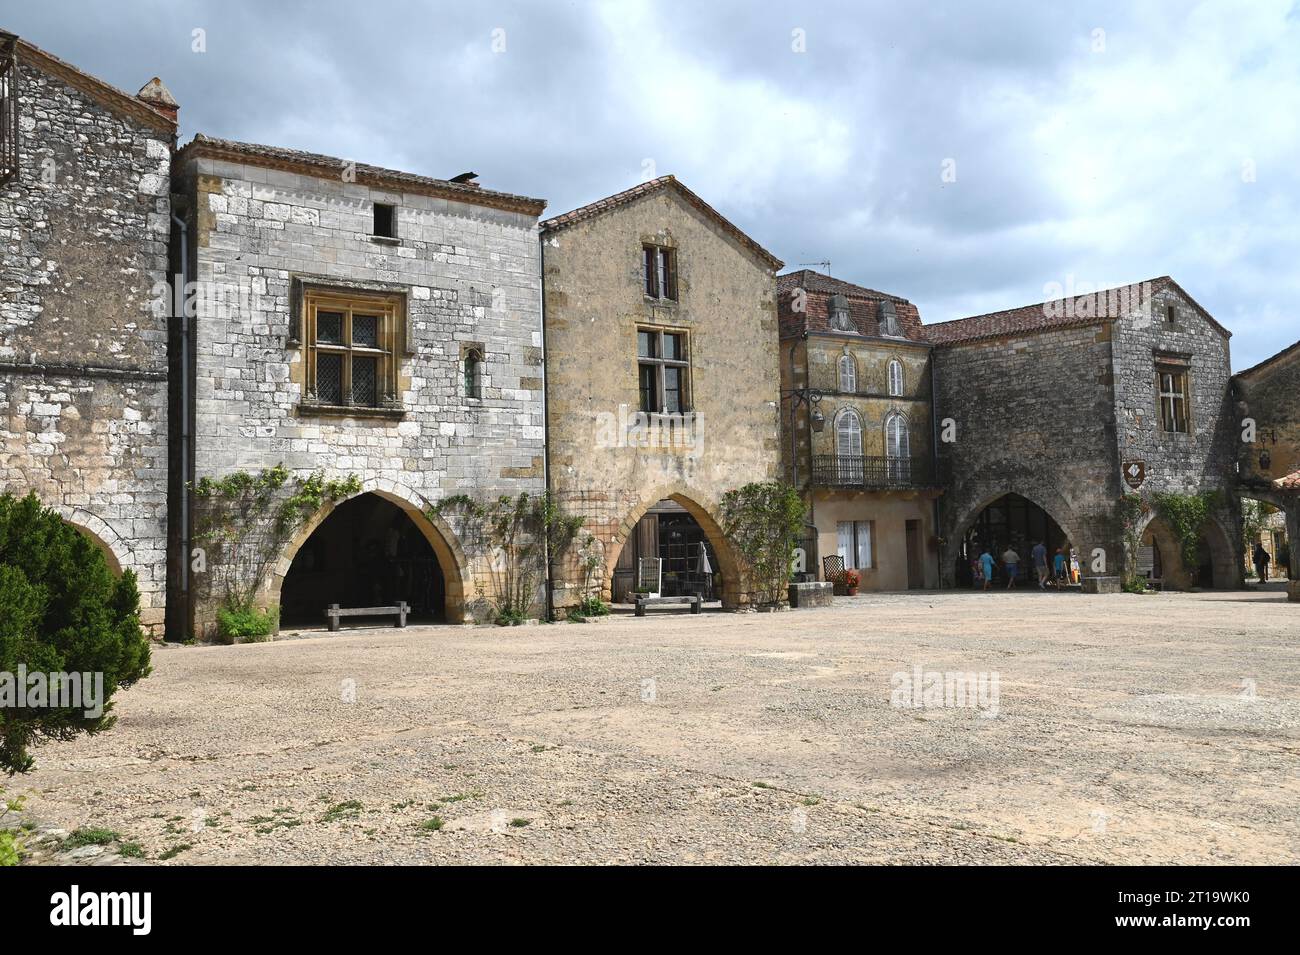 The market square area of the Bastide village of Monpazier in the Dordogne region of France. The bastide was founded in 1284 by Edward1 of England. Stock Photo